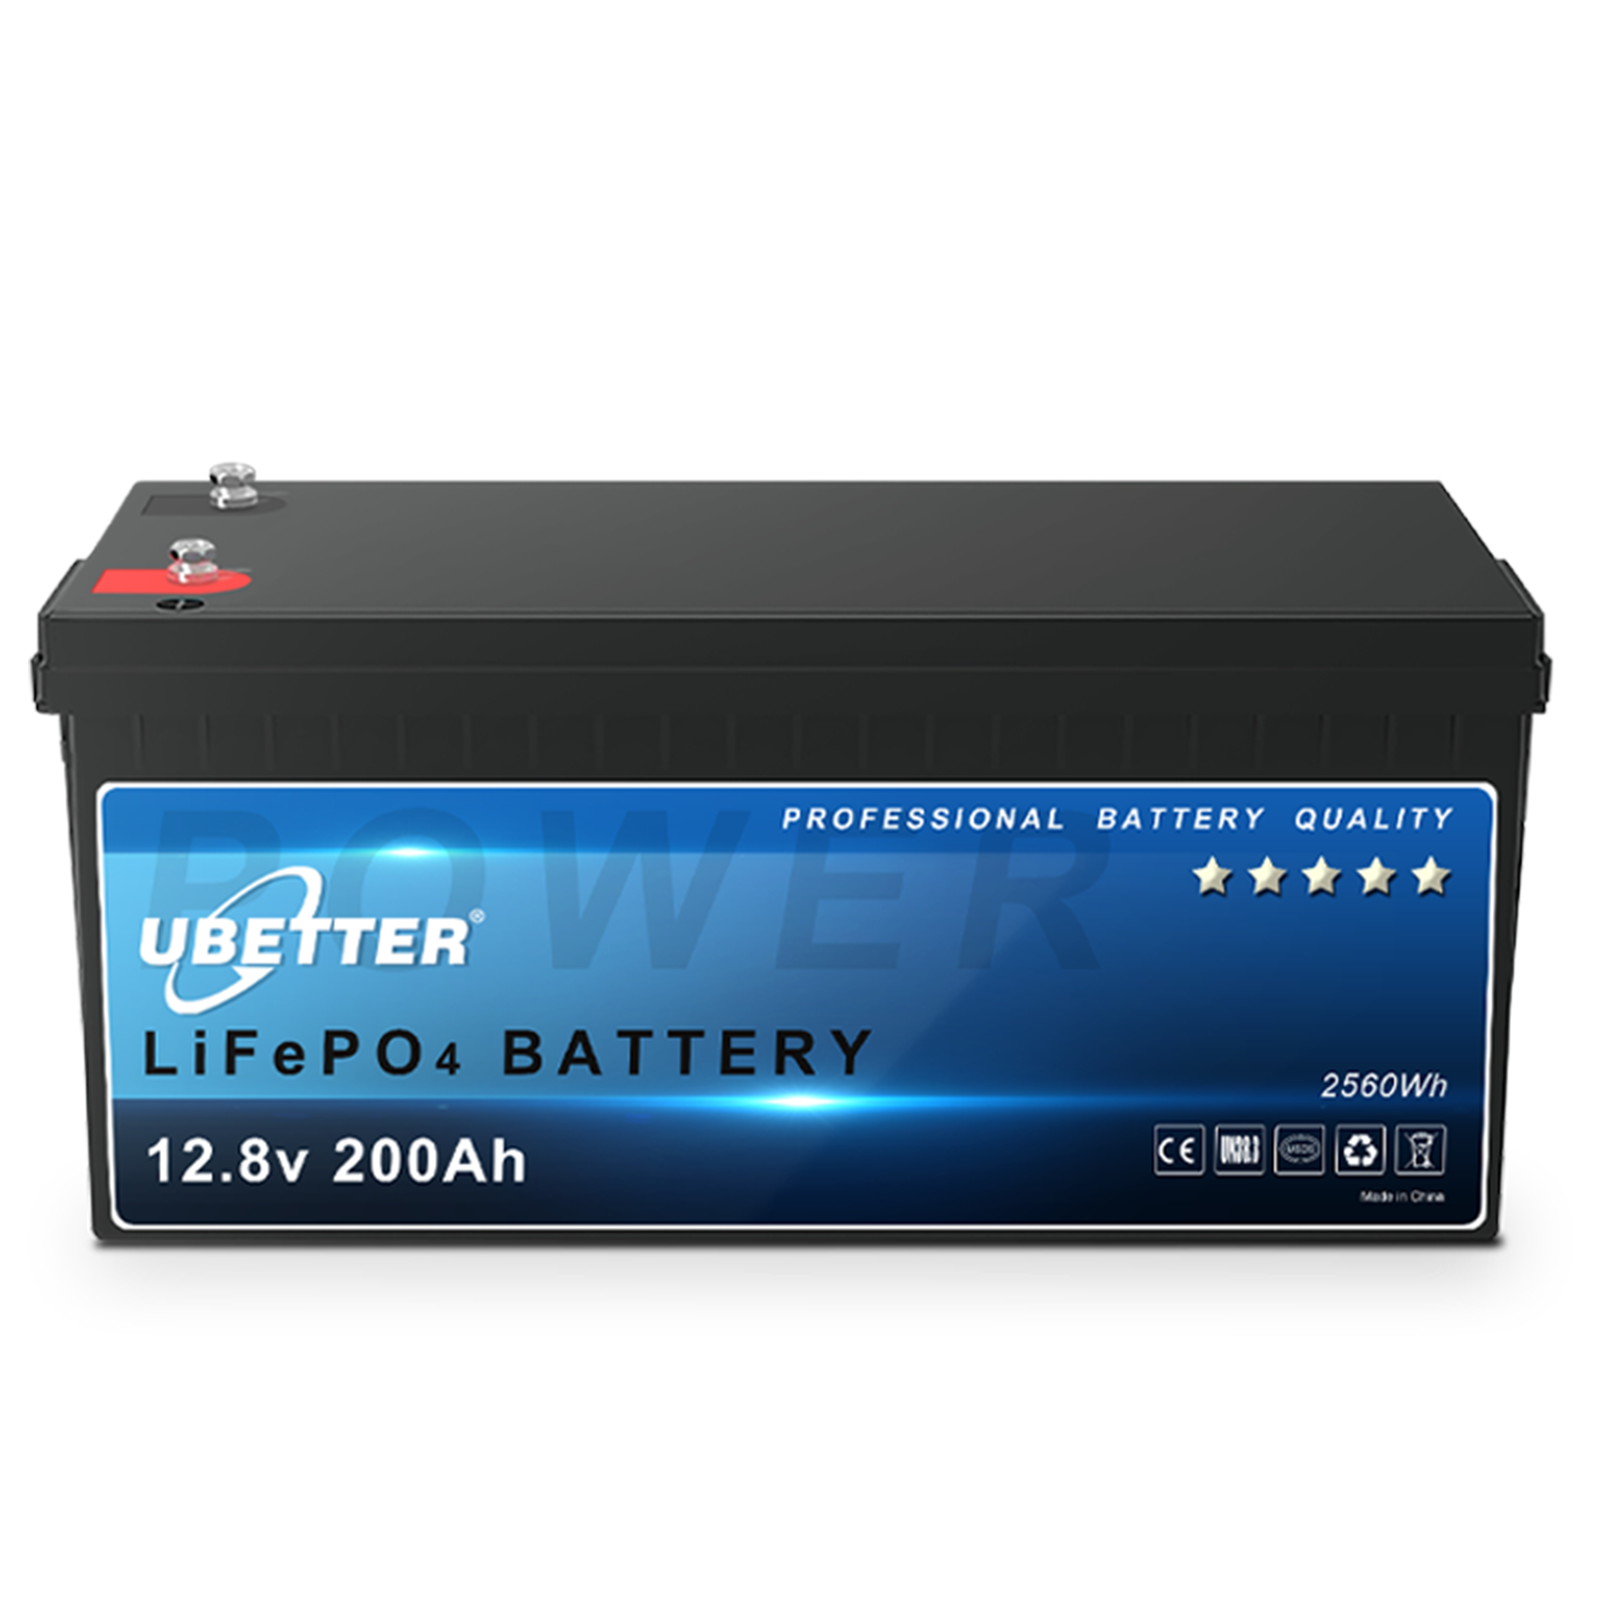 best price,ubetter,12v,200ah,lifepo4,lithium,battery,2560wh,eu,discount